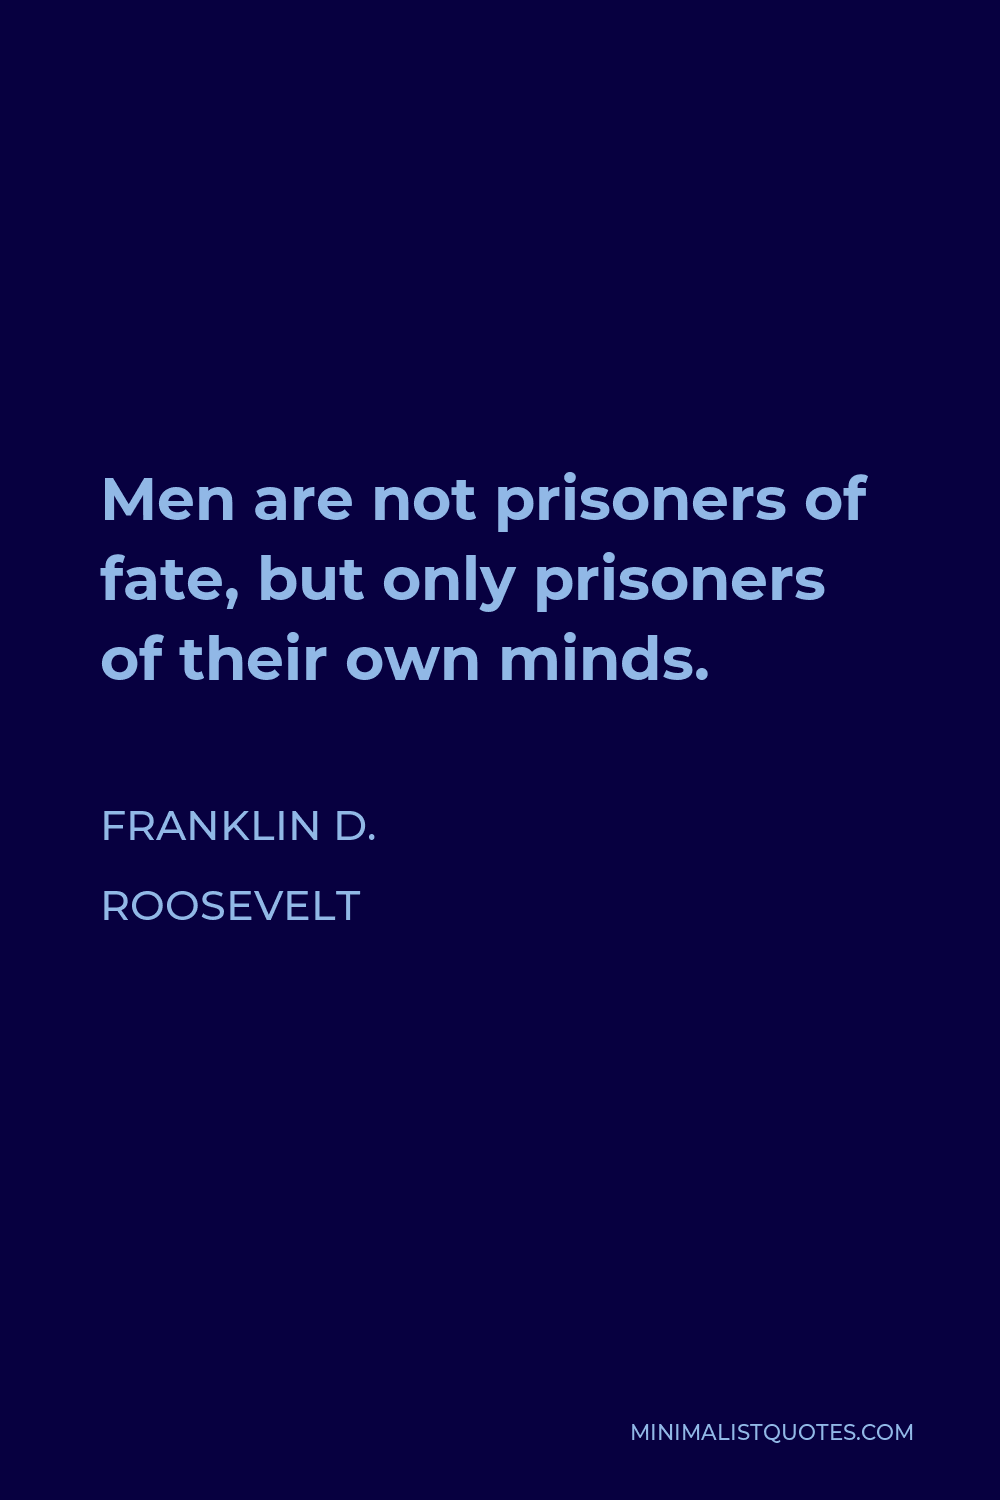 Franklin D. Roosevelt Quote - Men are not prisoners of fate, but only prisoners of their own minds.